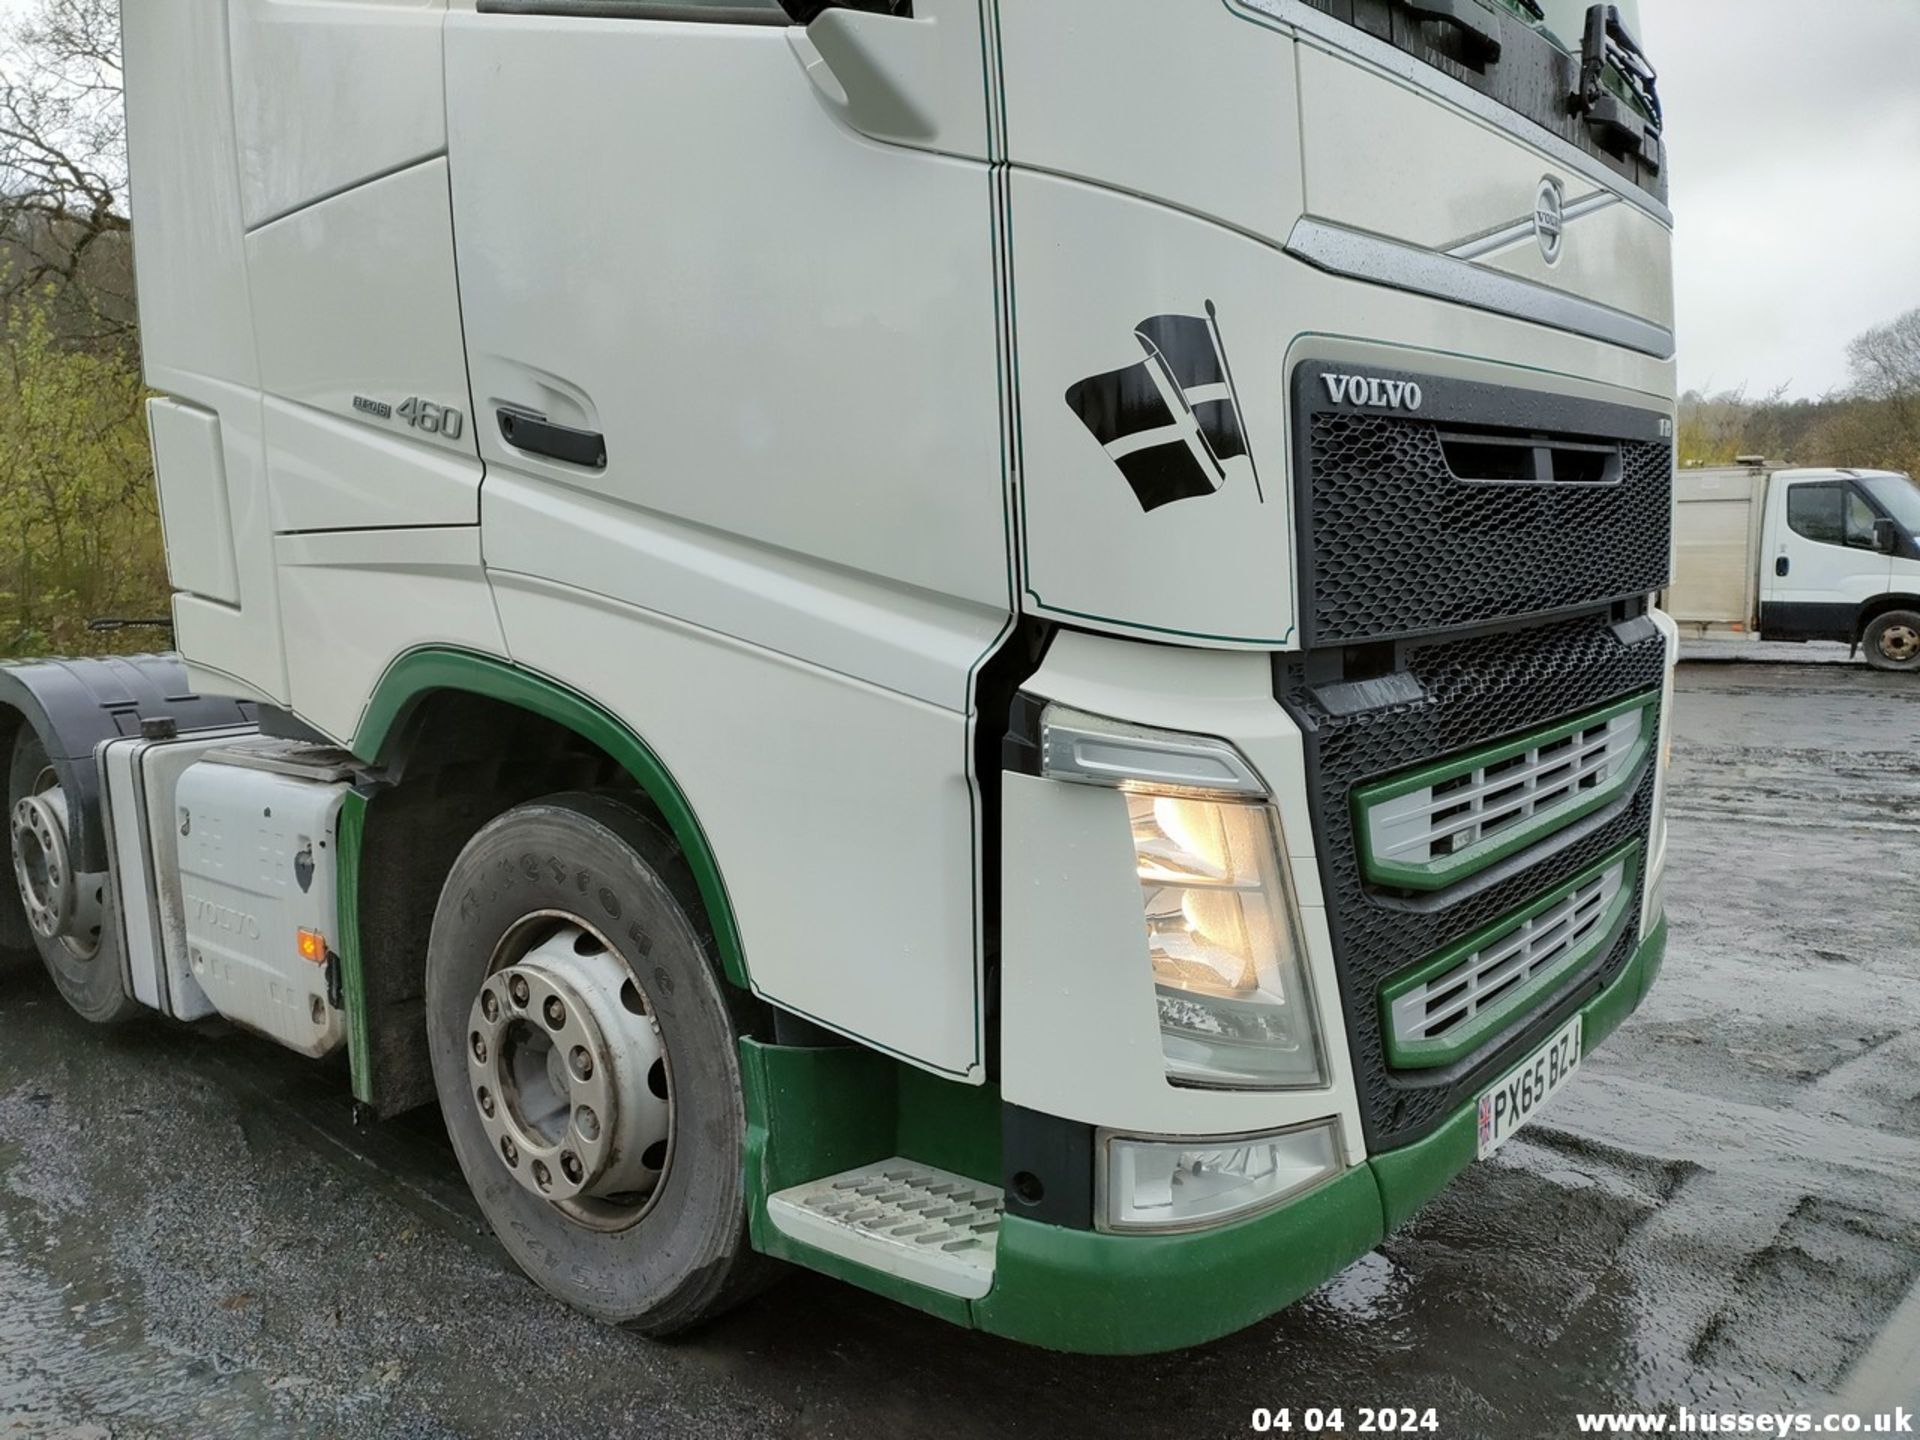 15/65 VOLVO FH - 12777cc 2dr Tractor Unit (White) - Image 4 of 34